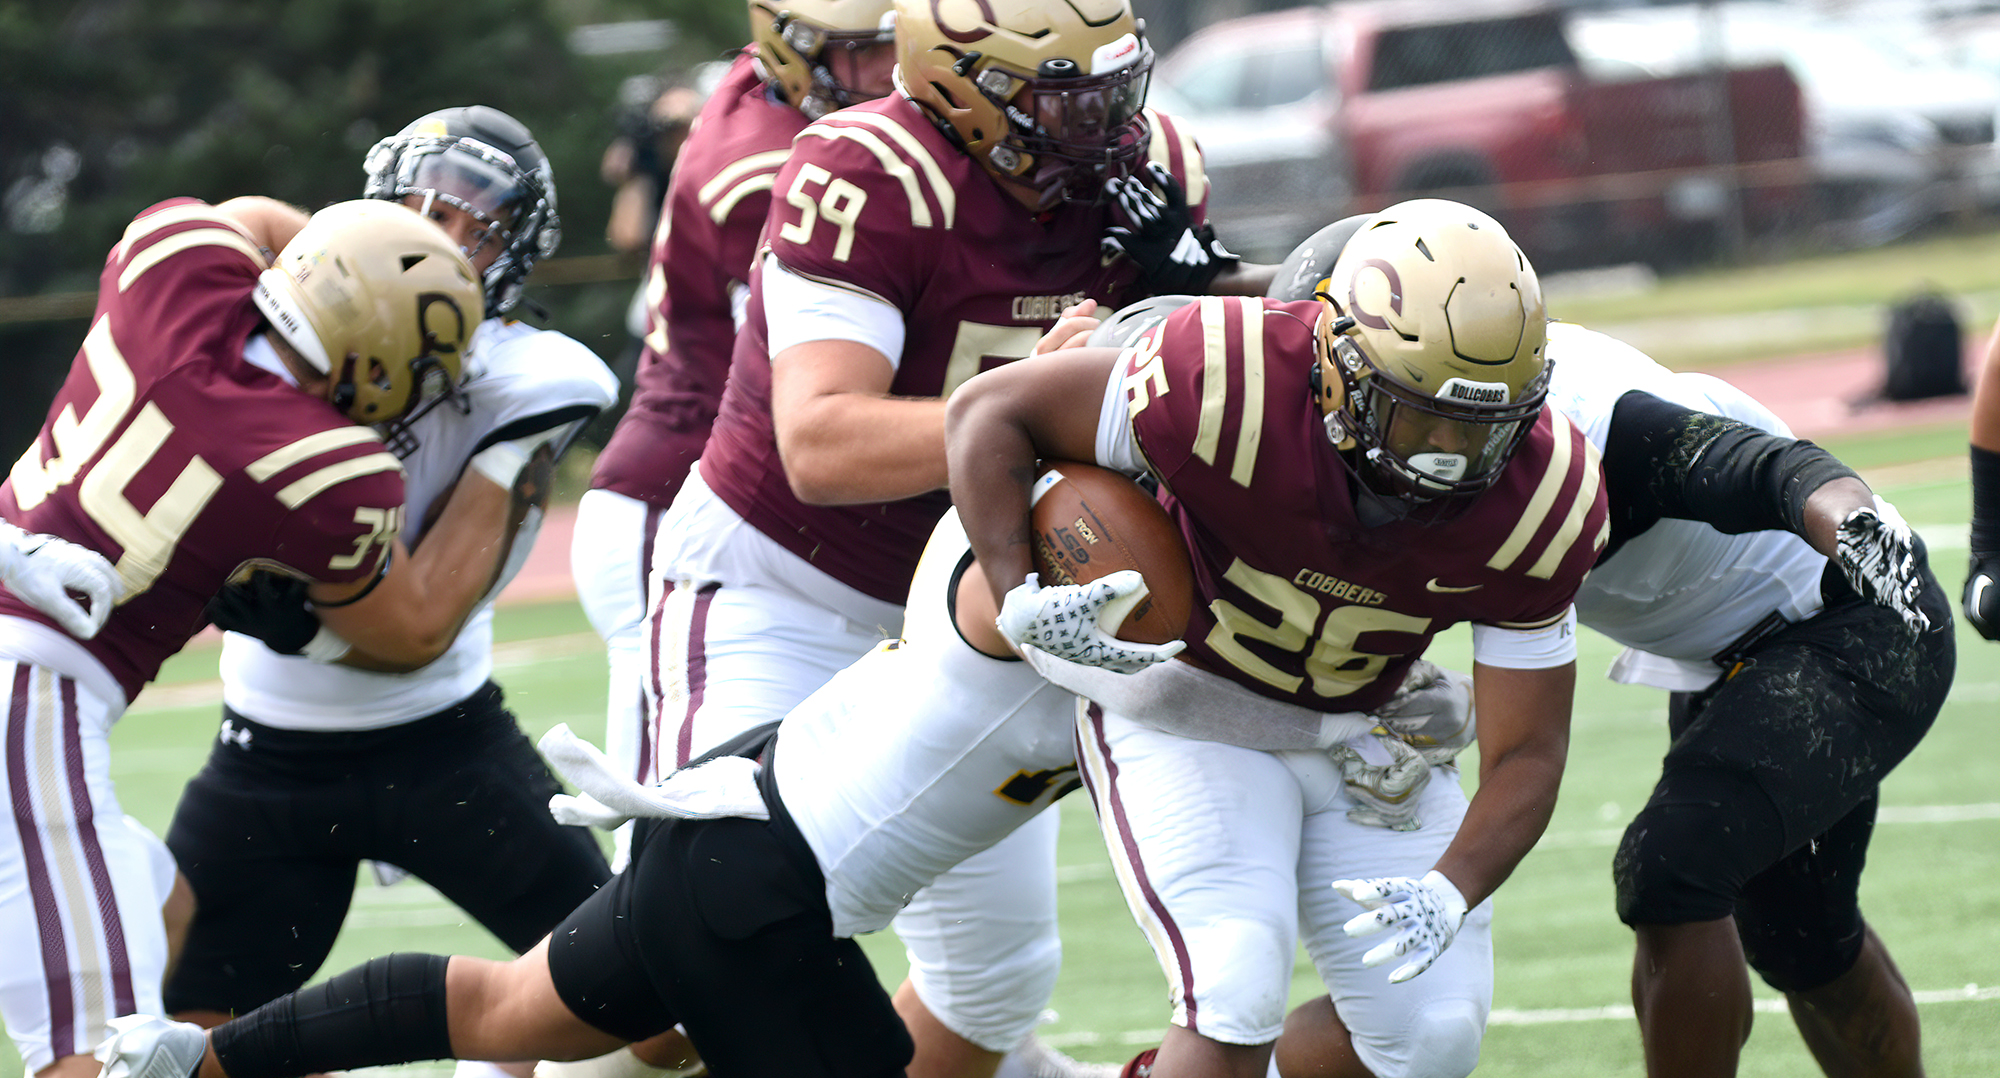 Zavier Carroll was one of four players who rushed for a touchdown in the Cobbers' 49-16 win at St. Scholastica.